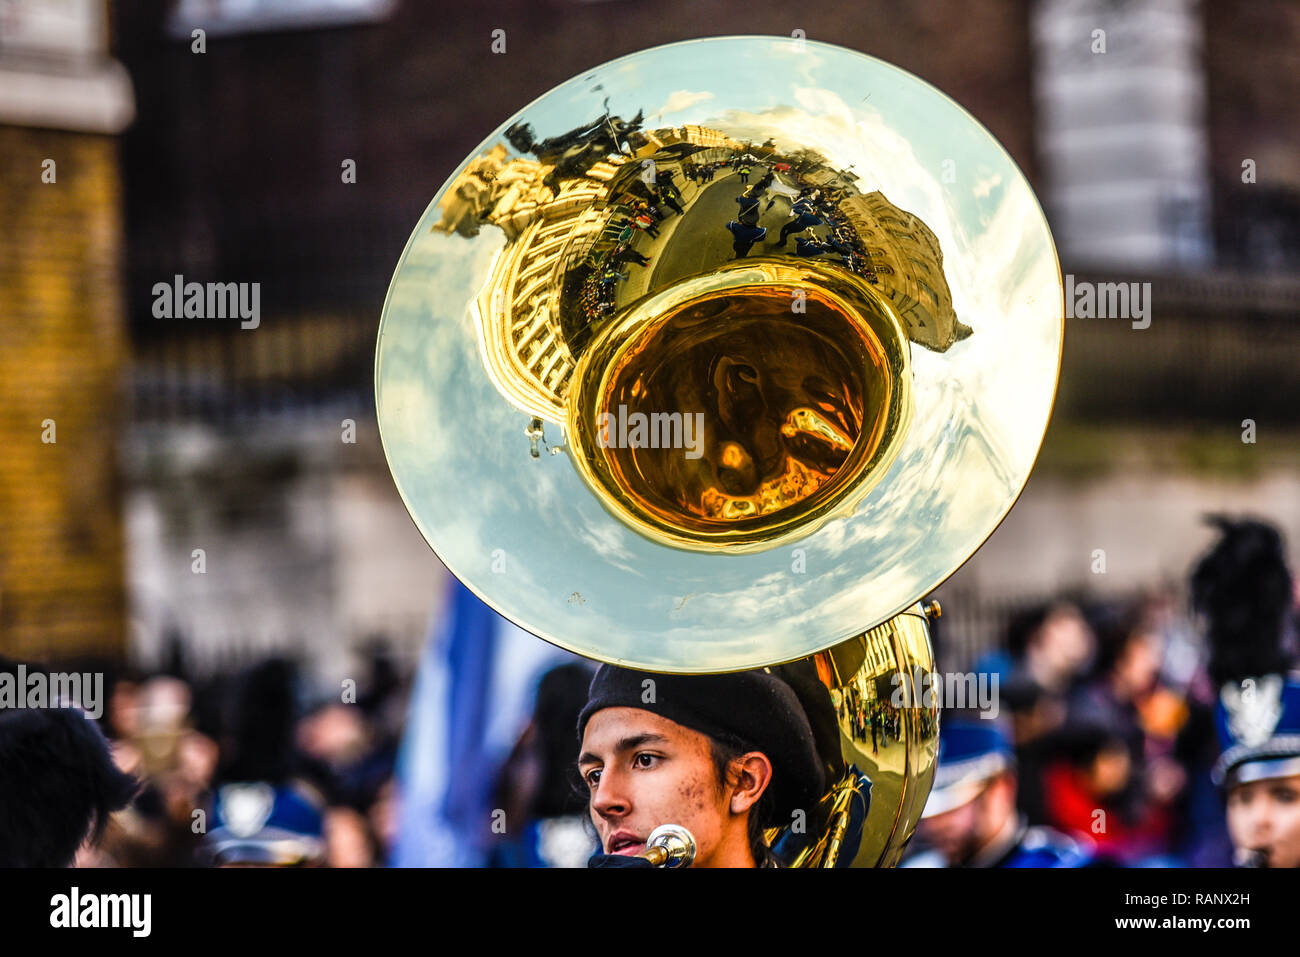 Redlands All Star Marching Band from California, USA, at London's New Year's Day Parade, UK. Brass instrument with reflections Stock Photo